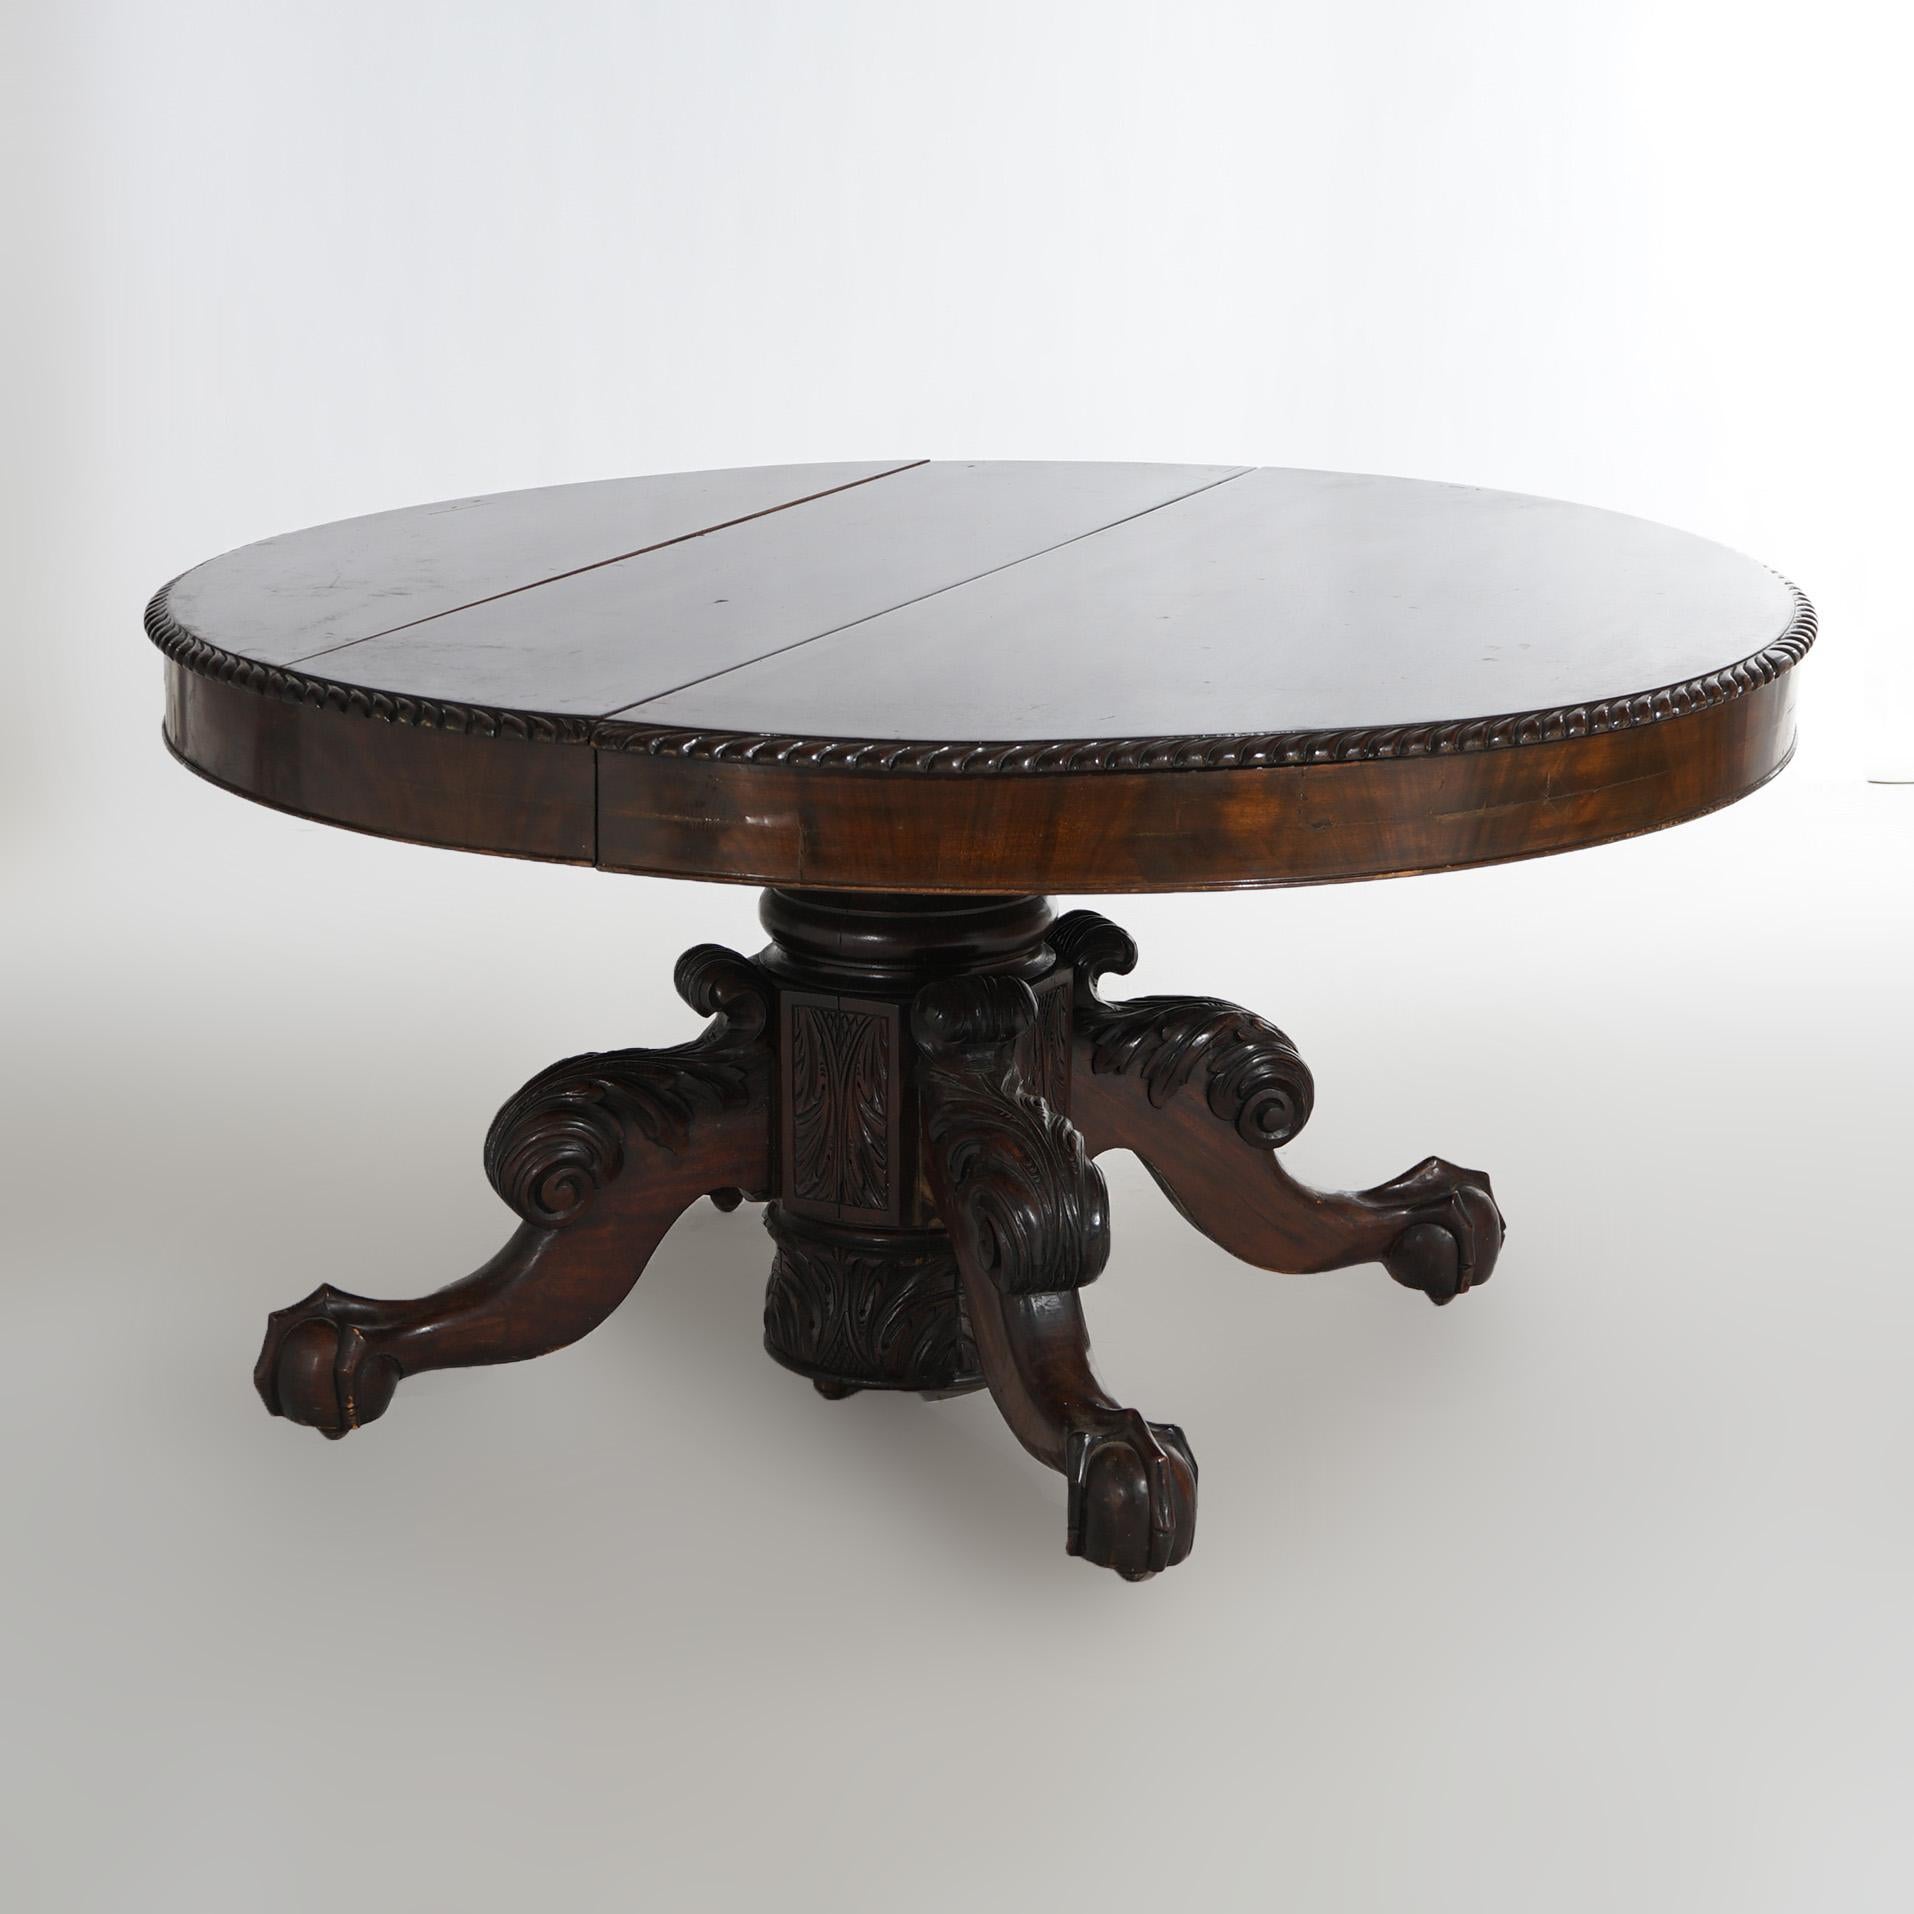 An antique Neoclassical Greco American Empire extension dining table offers flame mahogany construction in round form with carved gadroon trimming over stylized urn form pedestal and raised on foliate carved cabriole legs terminating in claw and